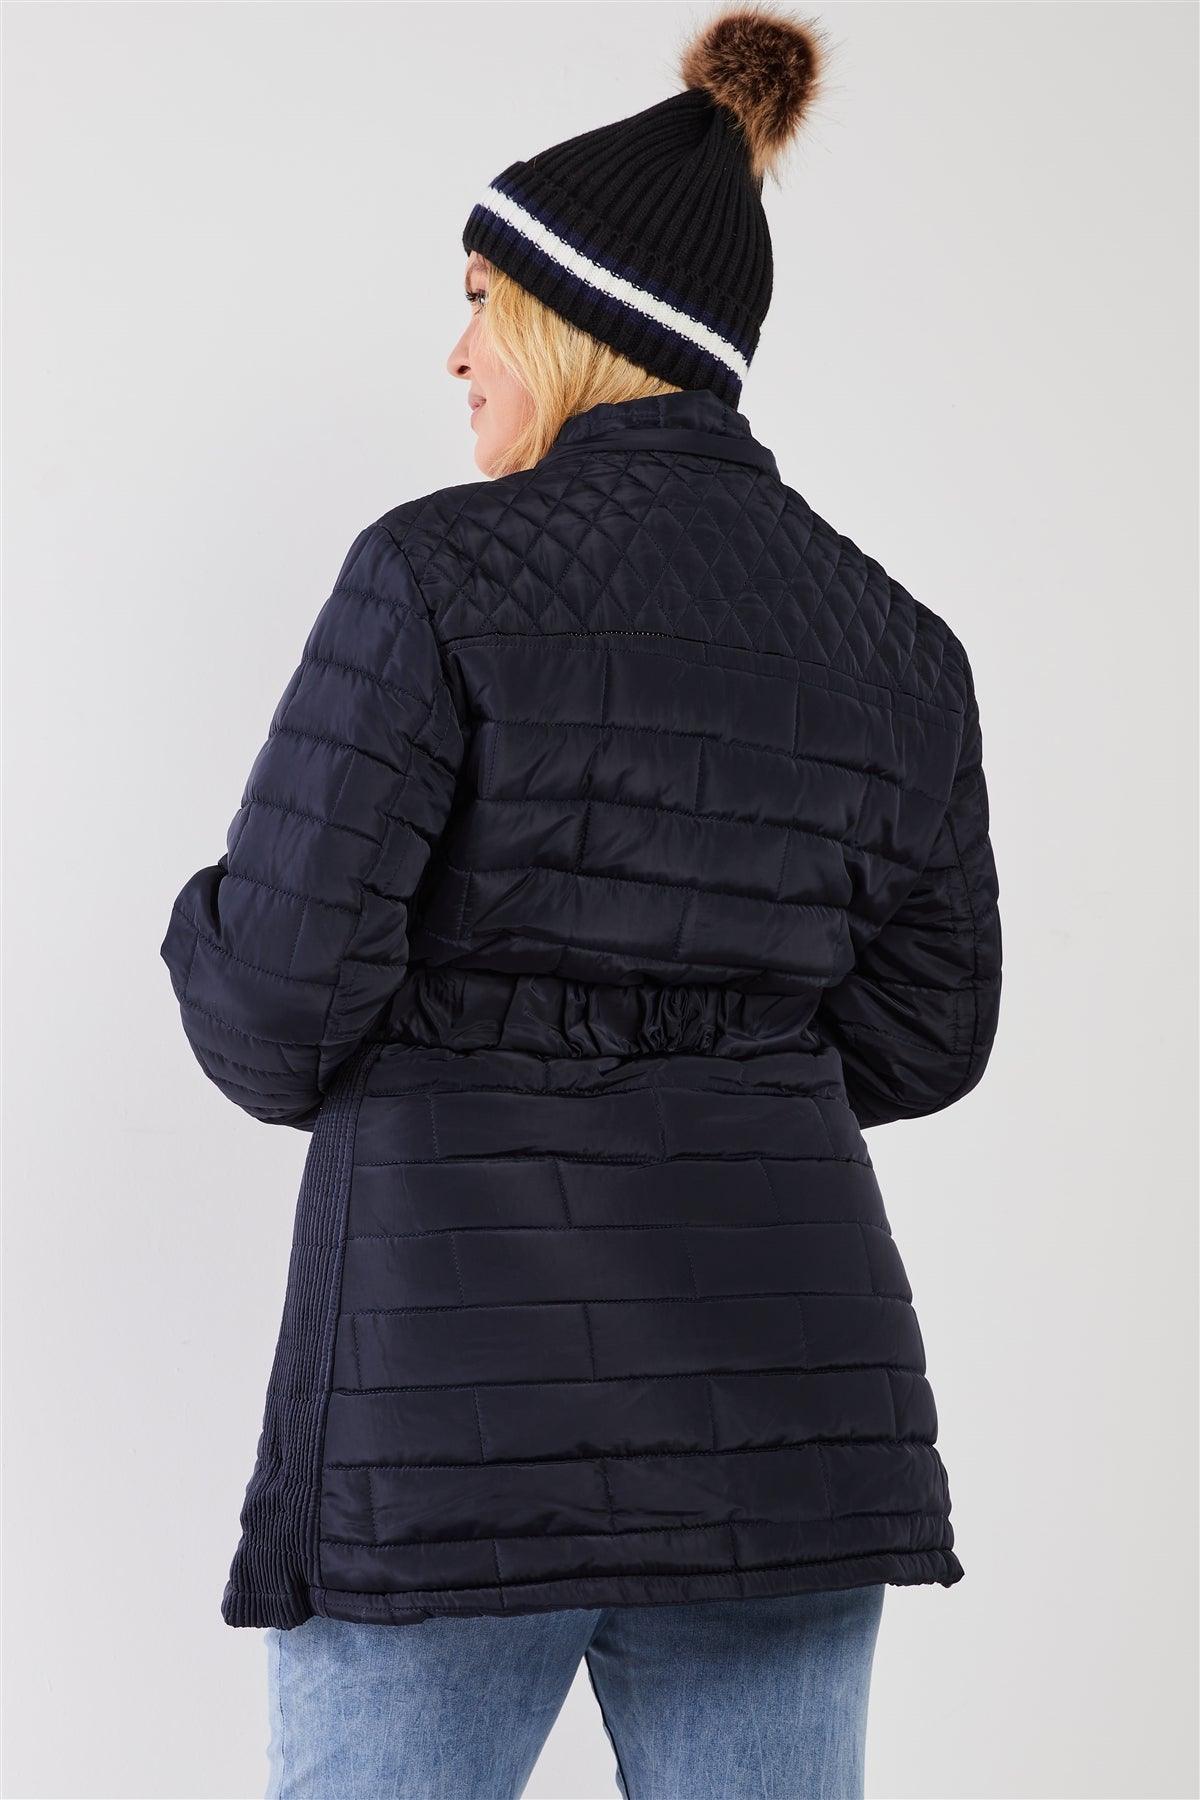 Junior Plus Navy Diamond Quilt Faux Fur Hood Belted Padded Long Puffer Jacket /3-2-1